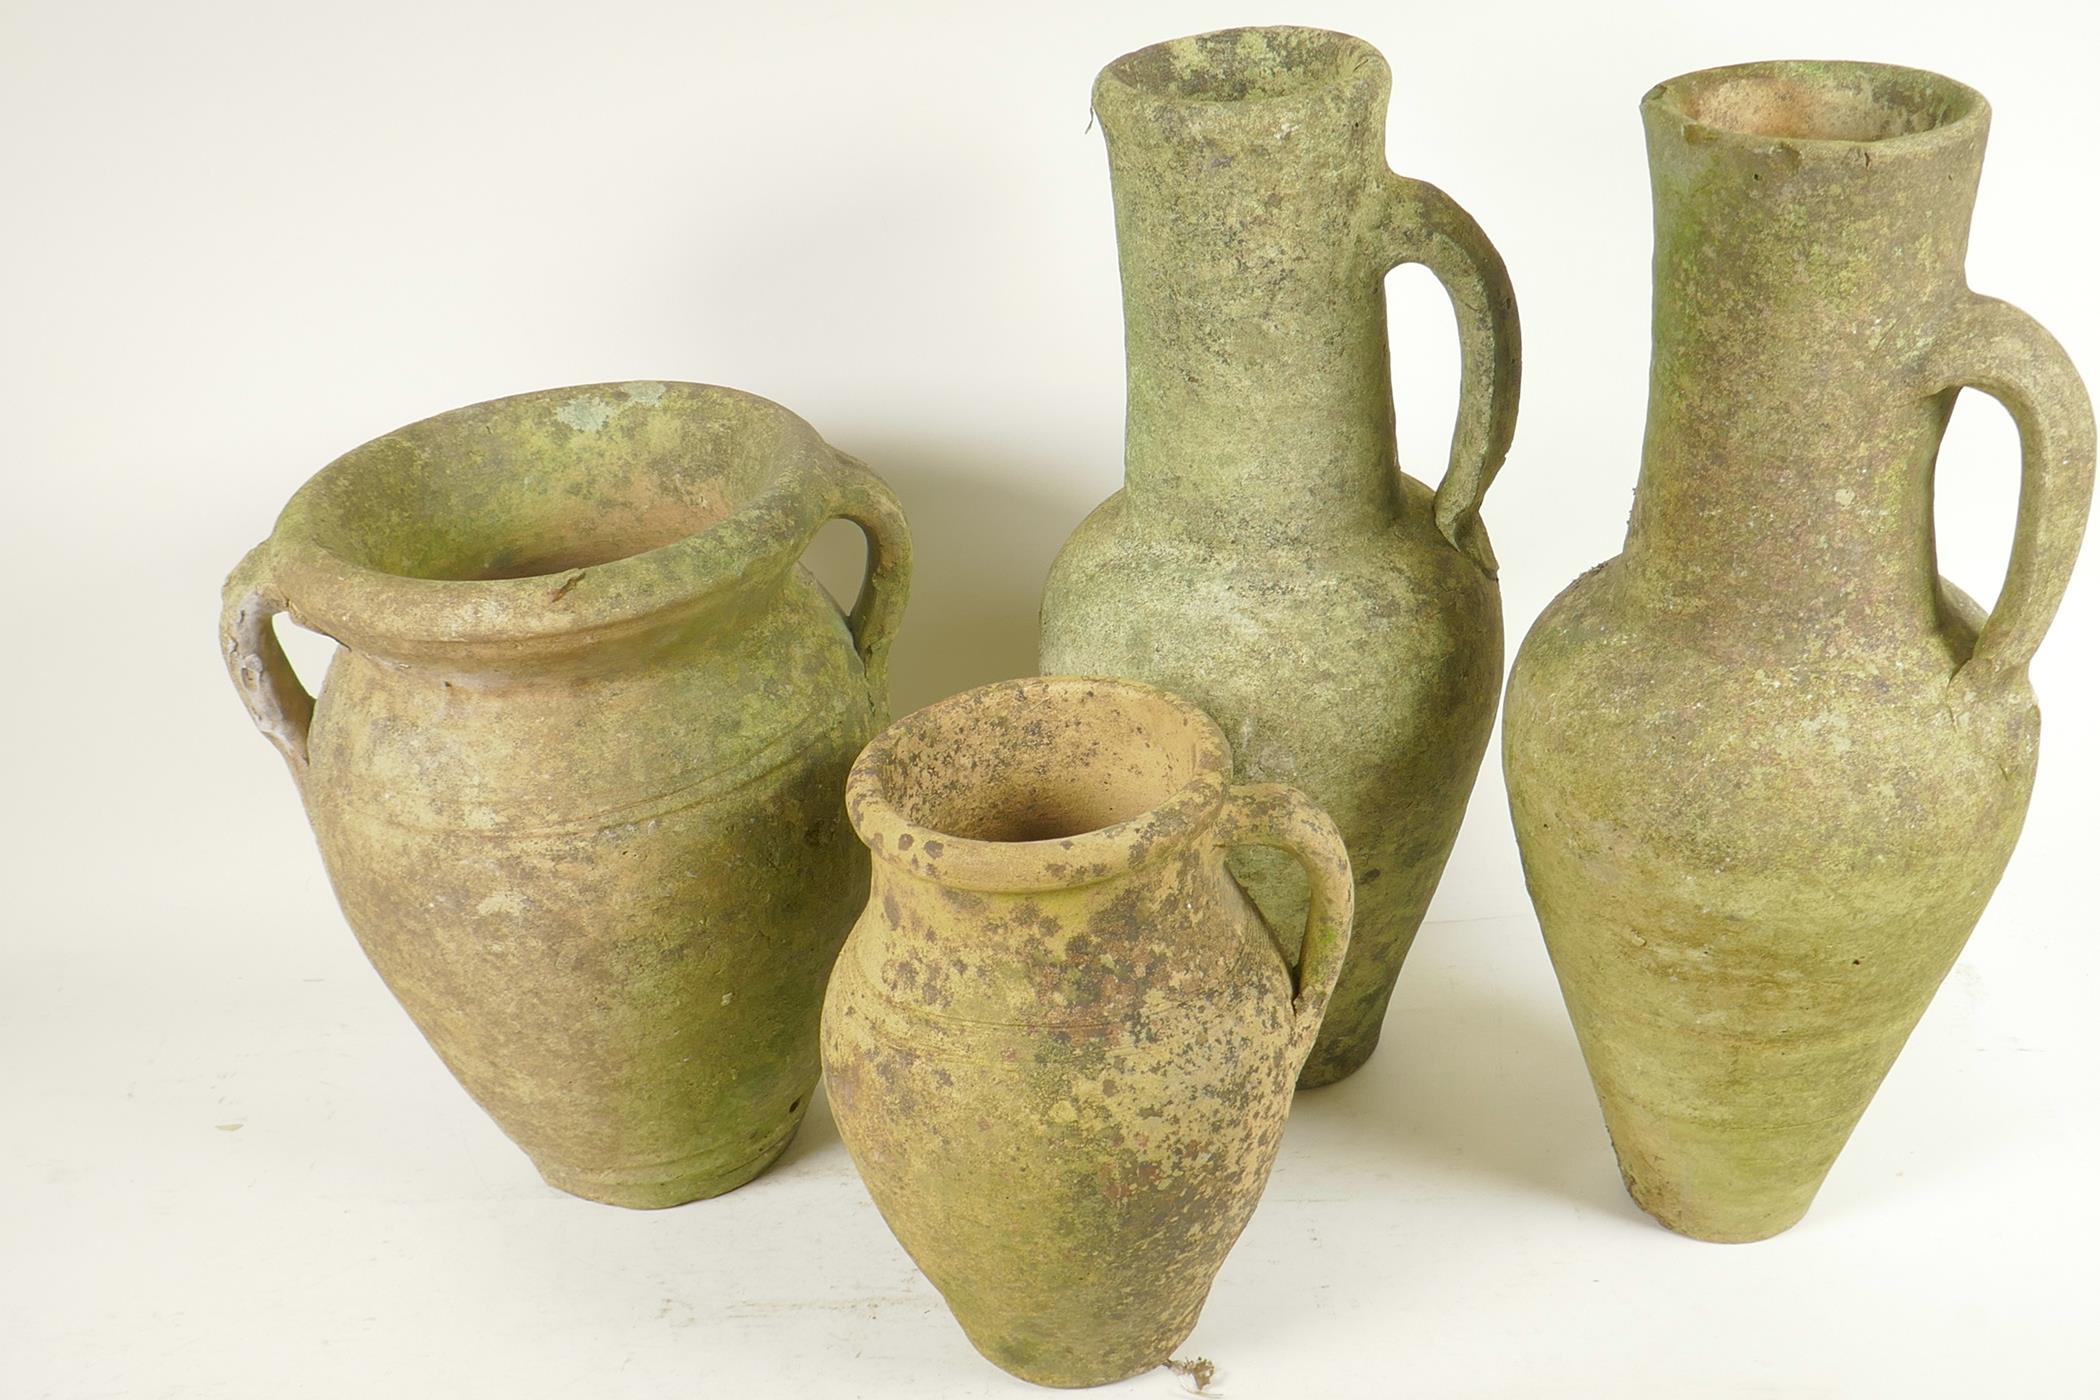 Four terracotta garden ornaments, a pair of Grecian style jugs, 15" high, a two handled vase and a - Image 2 of 2